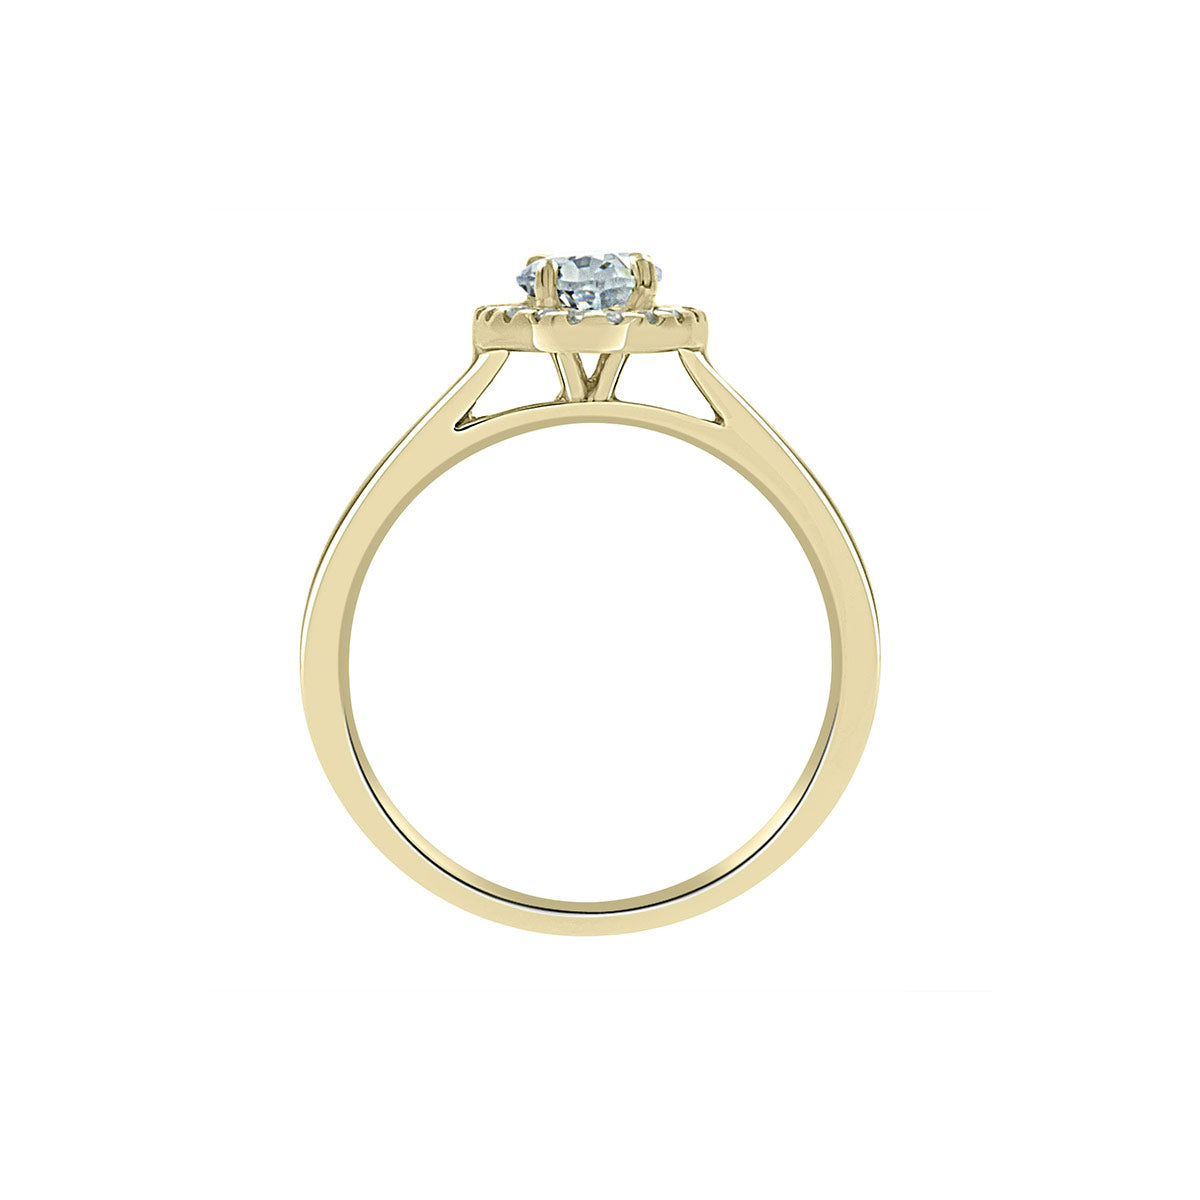 Oval Vintage Engagement Ring in yellow gold pictured in a vertical position